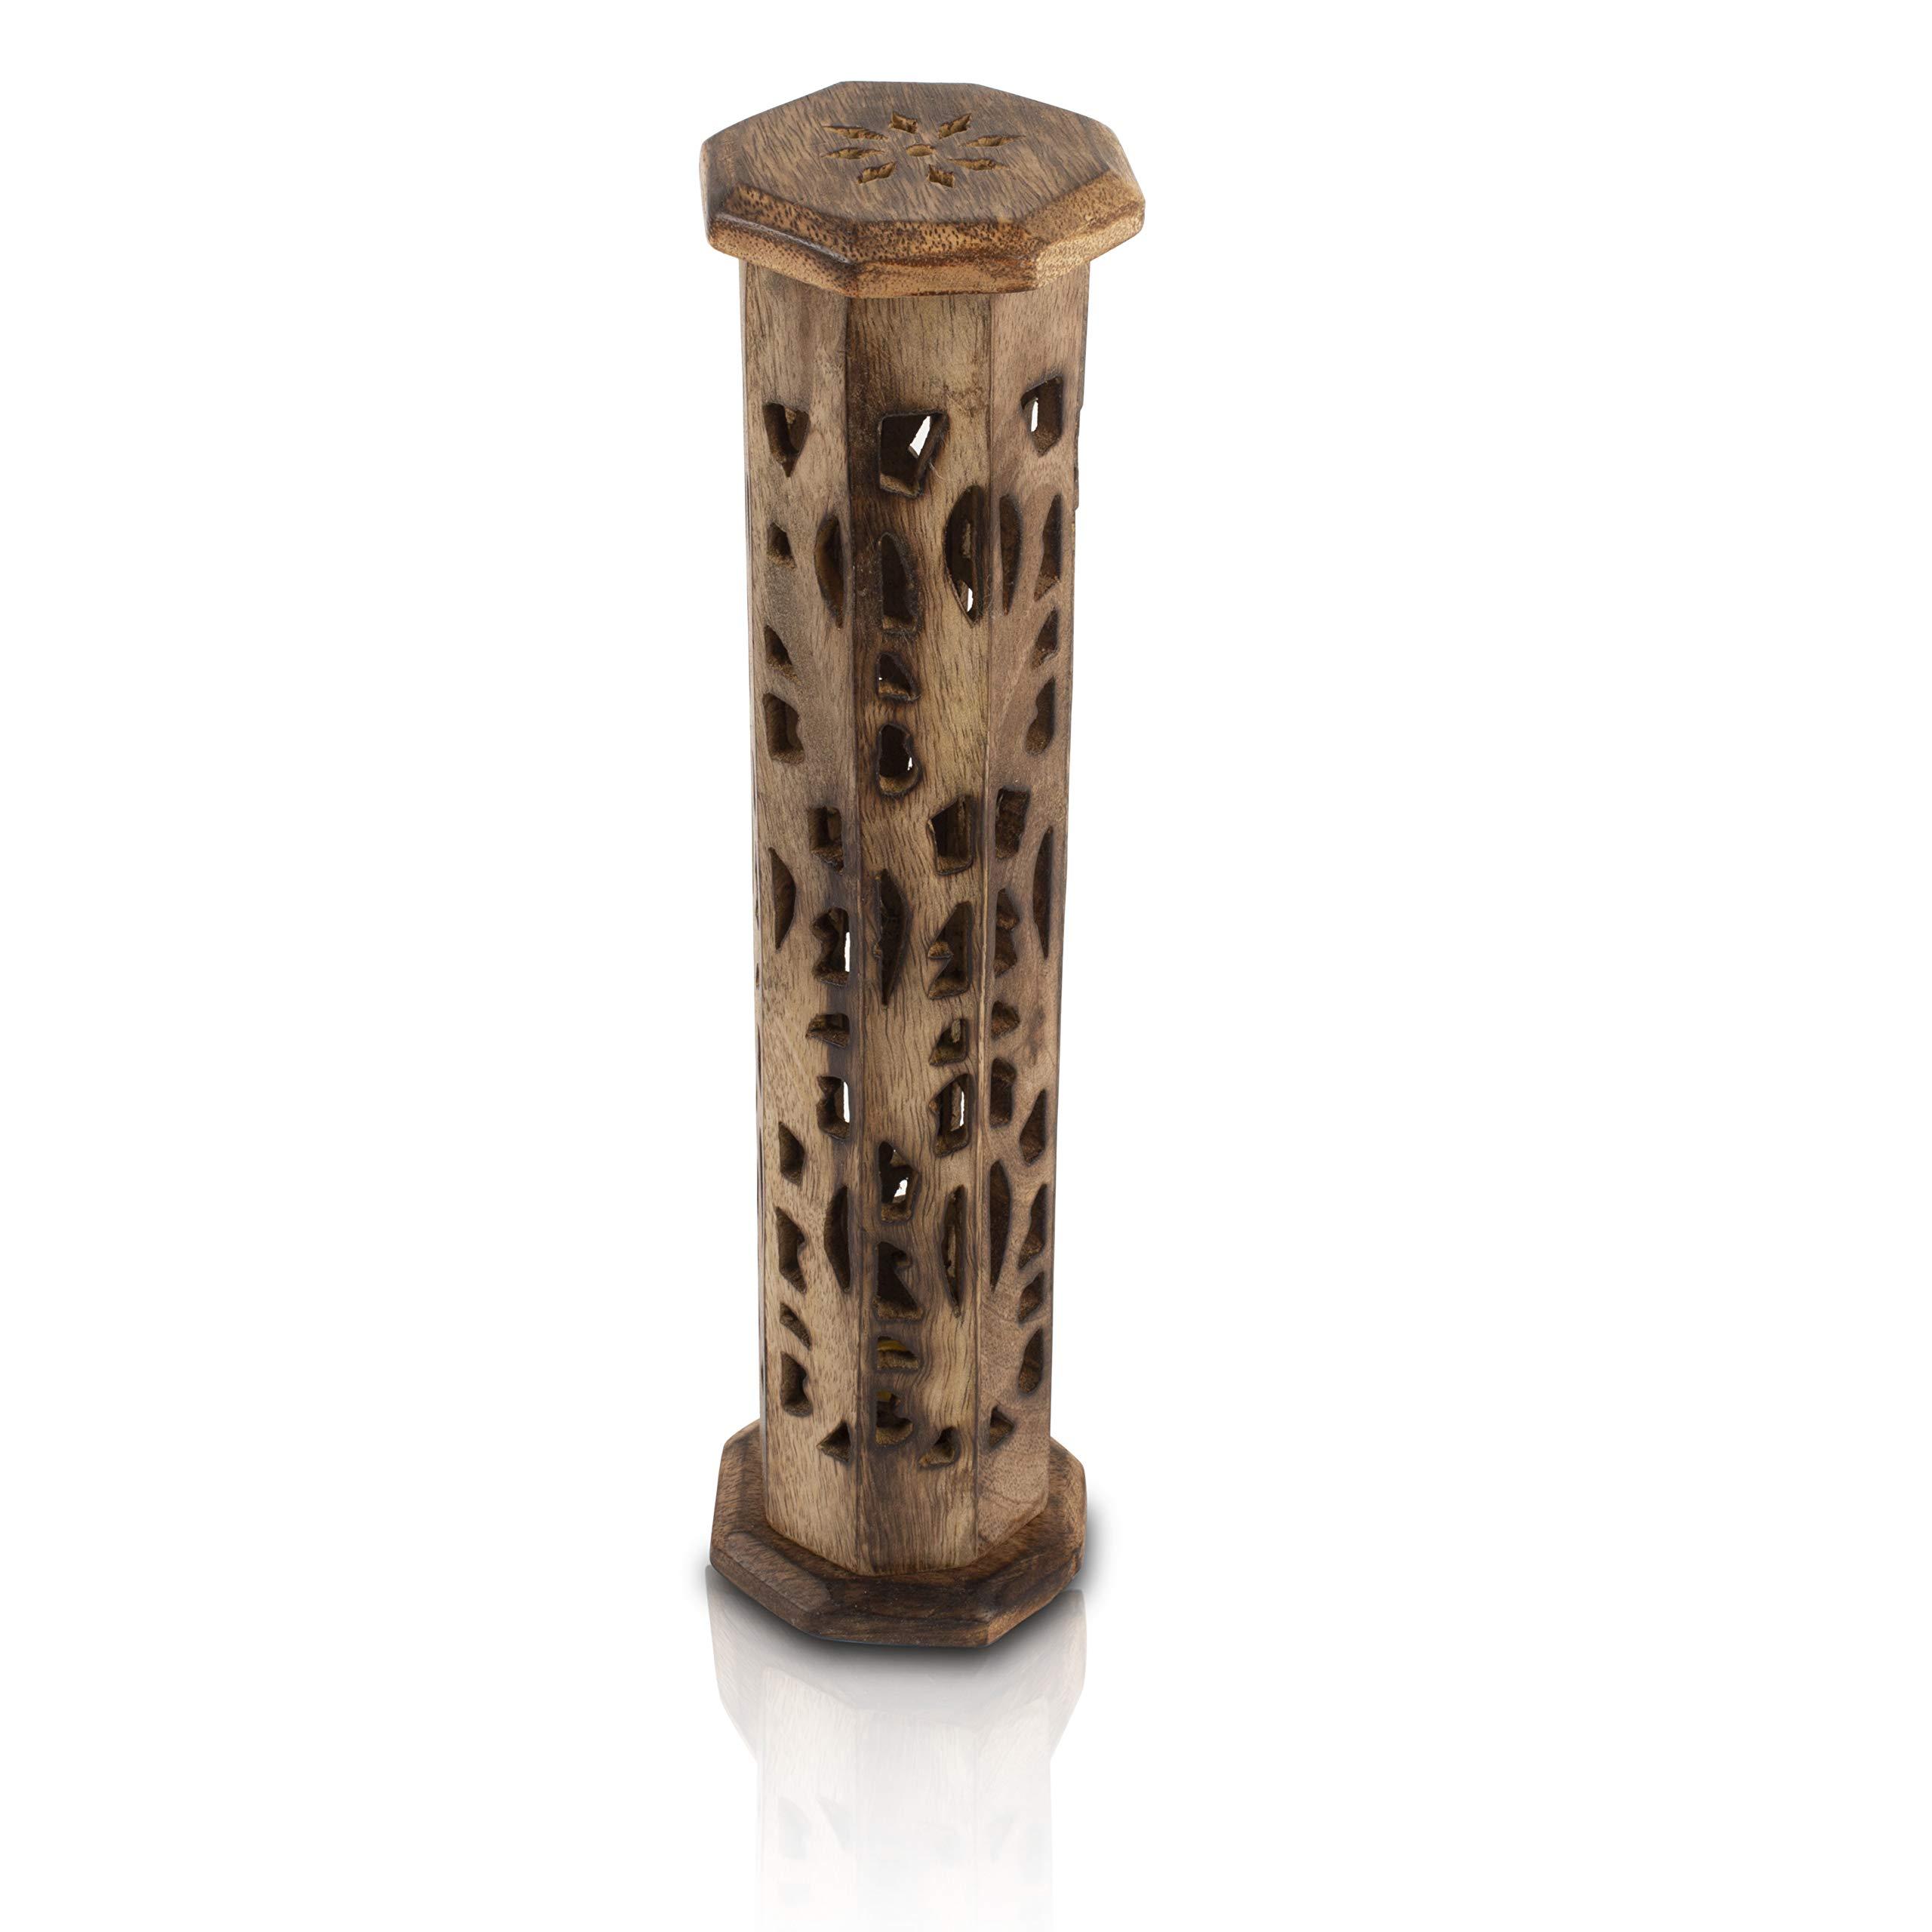 Wooden Incense Stick & Cone Burner Holder Tower Large Organic Eco Friendly Ash Catcher Agarbatti Holder Rustic Style Hand Carved For Meditation Yoga Aromatherapy Home Fragrance Products